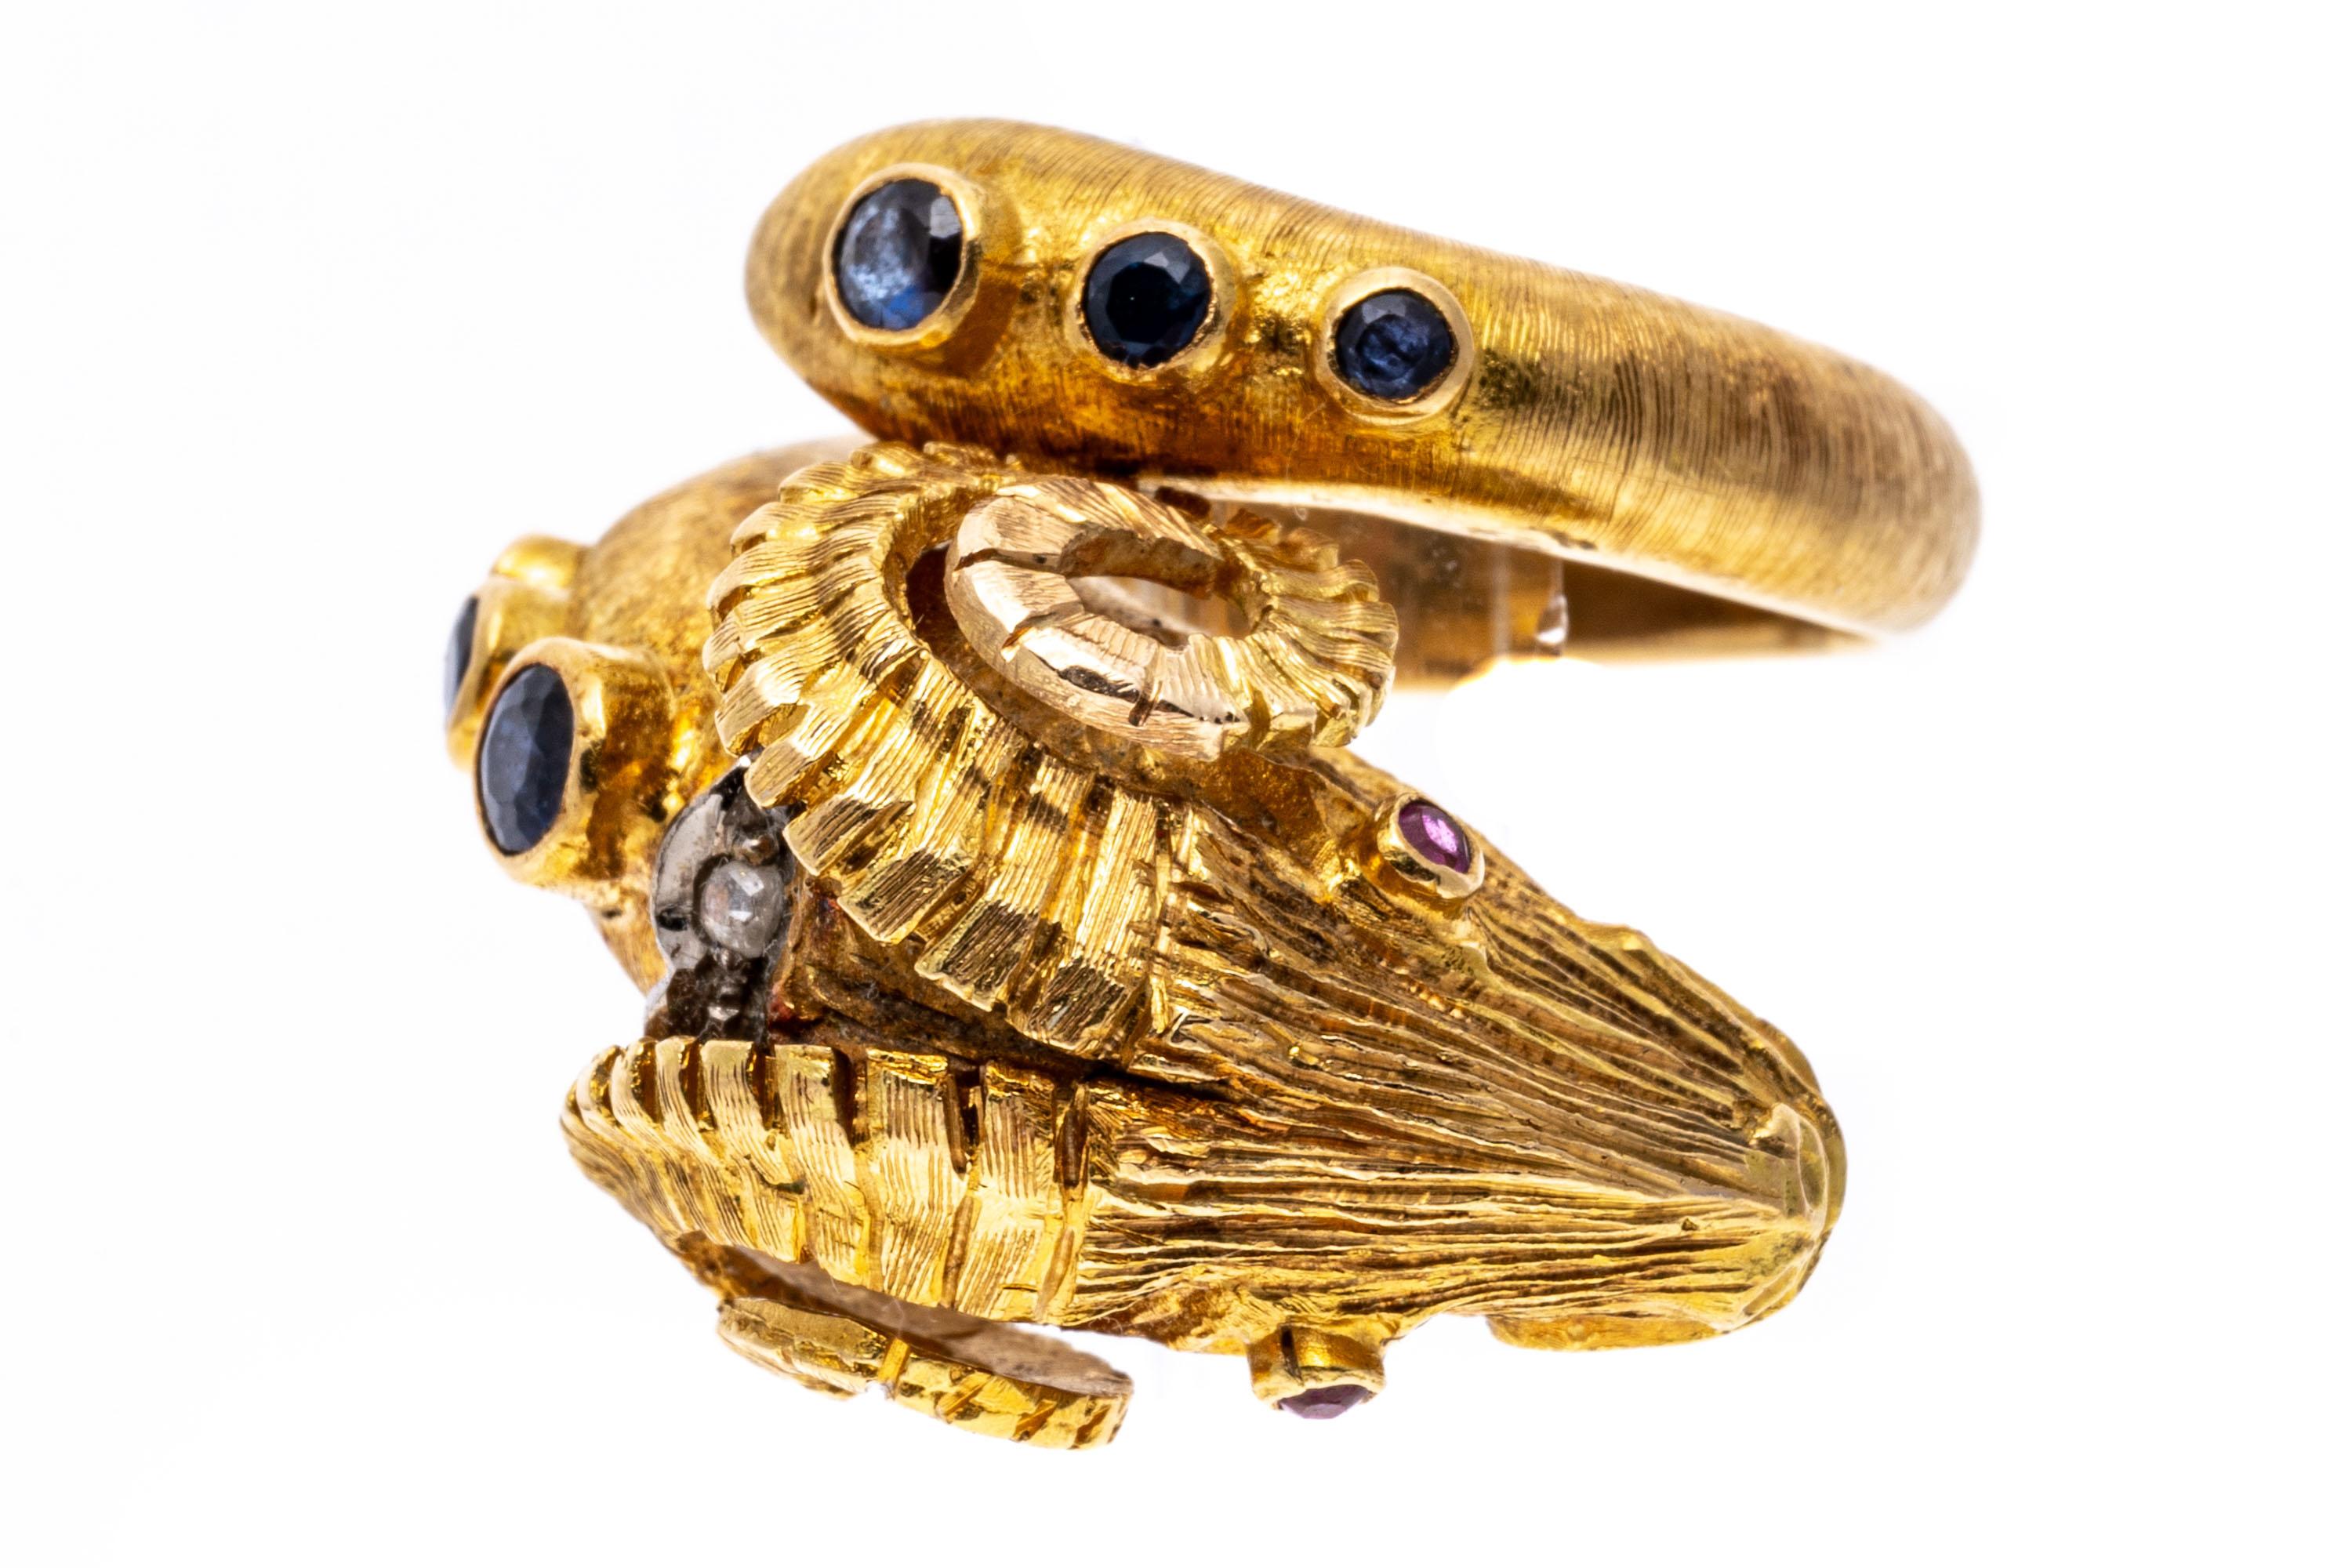 14k Yellow Gold Rams Head Ring With Sapphires, Rubies And Diamonds, Size 7-8 For Sale 9